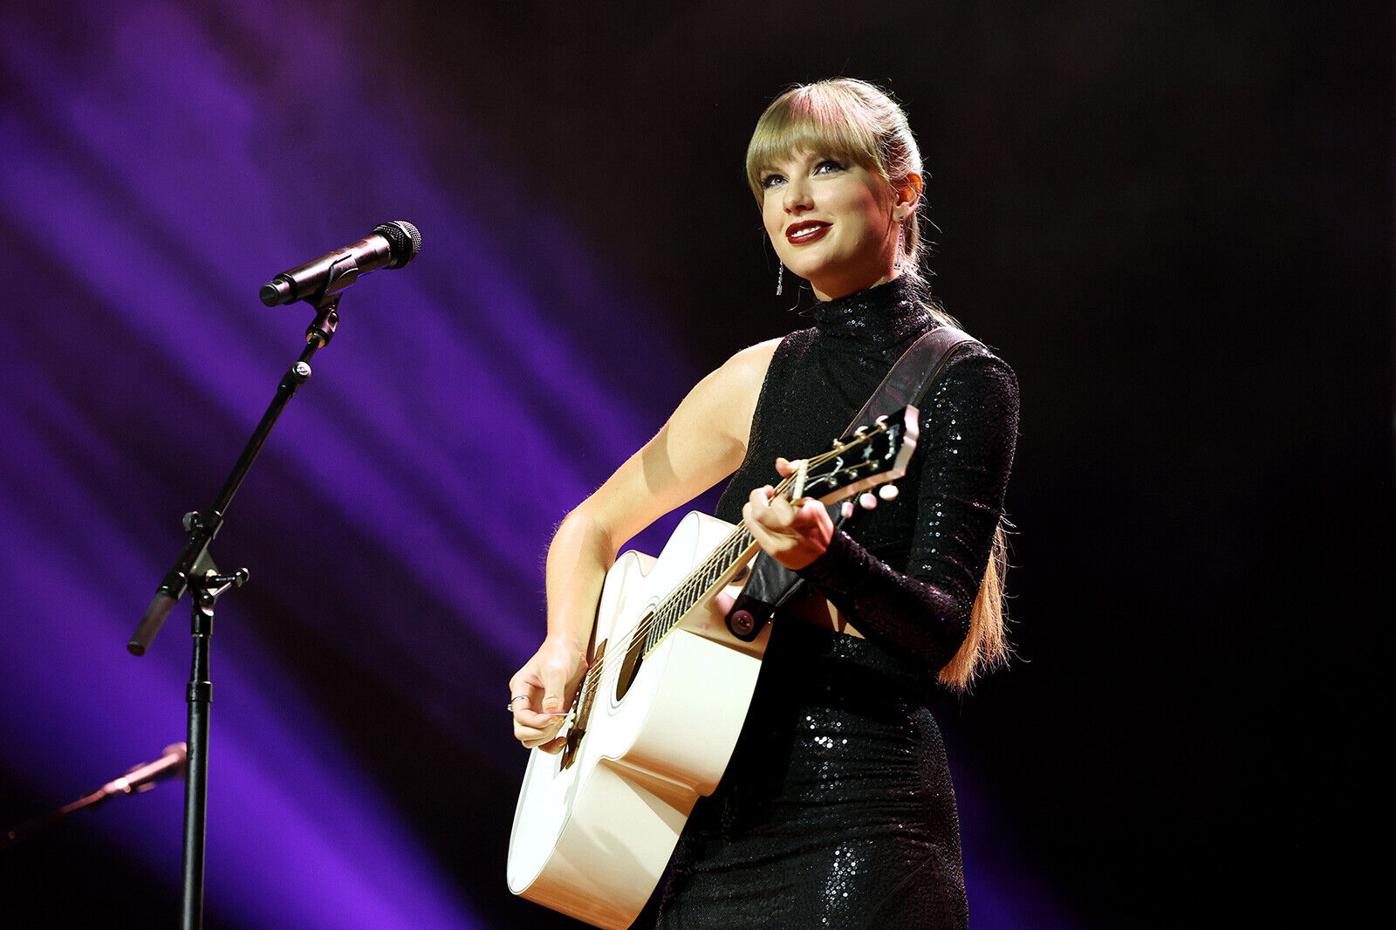 Taylor Swift tickets listed for thousands on StubHub after